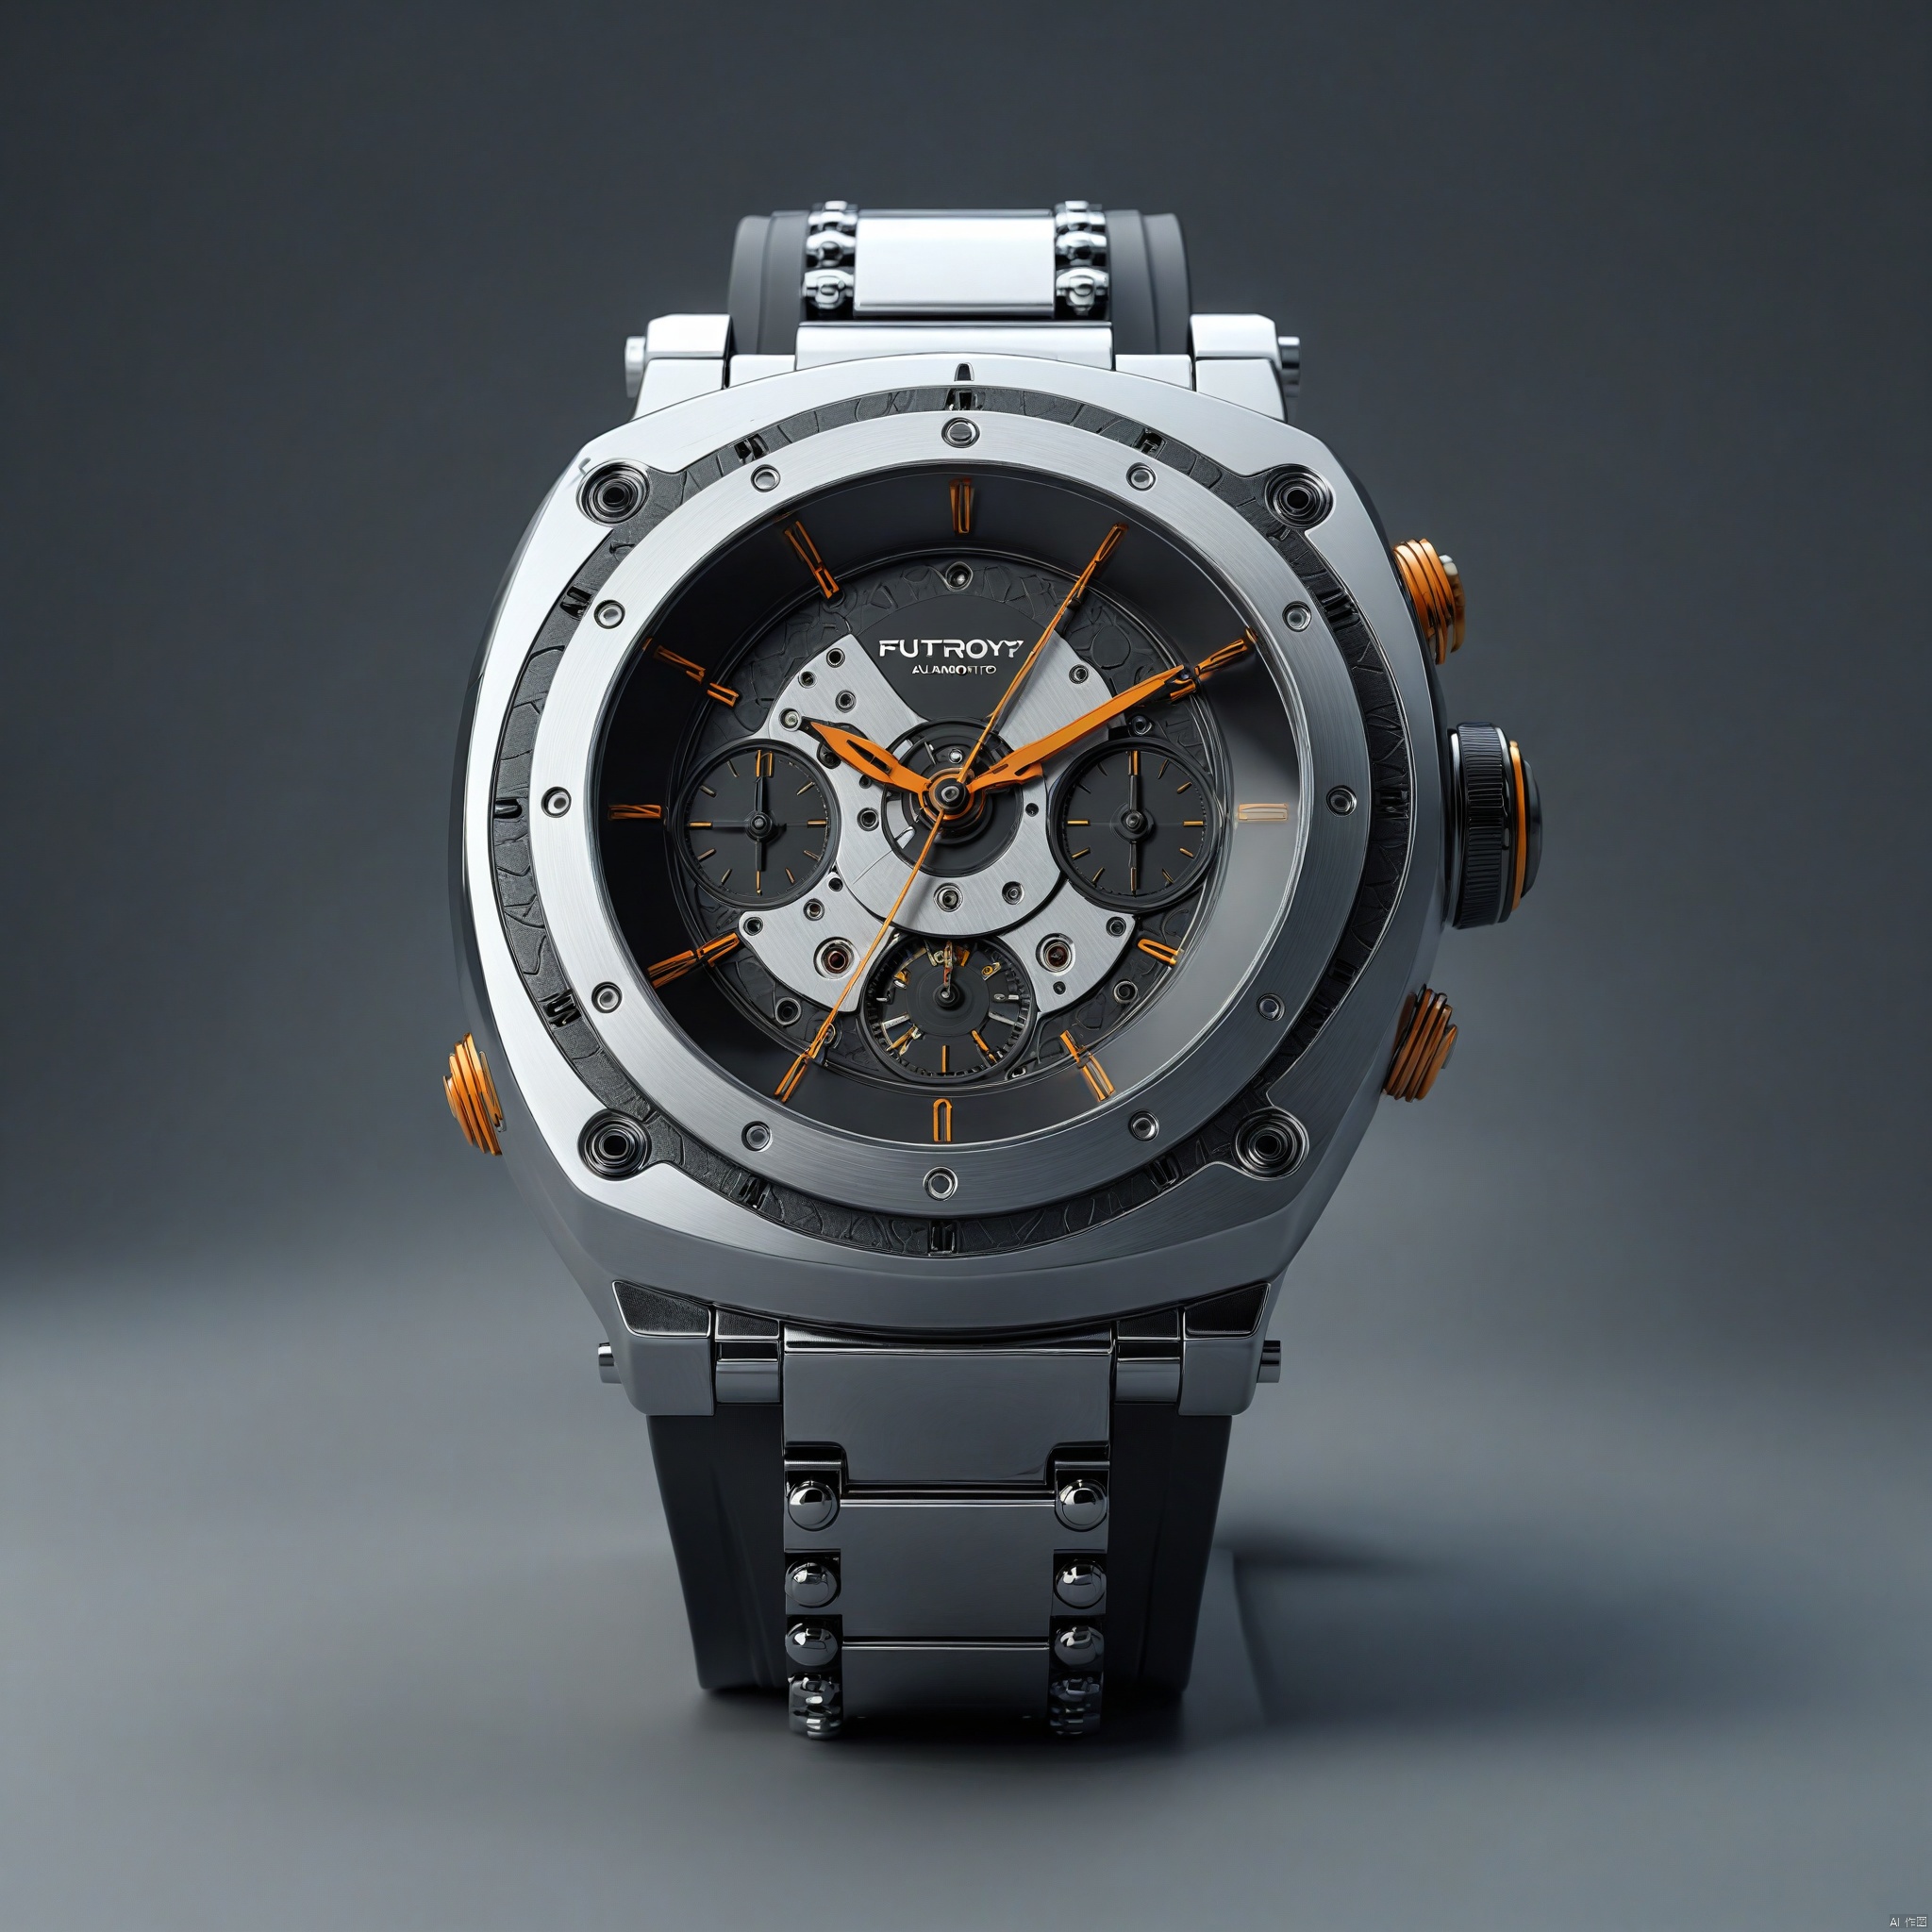 automatic wristwatch, stainless steel watch case, chrome watch hands, silicon strap, front view, futury punk style, showcasing complete wristwatch, C4D render, 8K., Advertising-inspired photography style, with close-ups in the style of product photos, Add details, enhance details, robot, ananqc,anantz